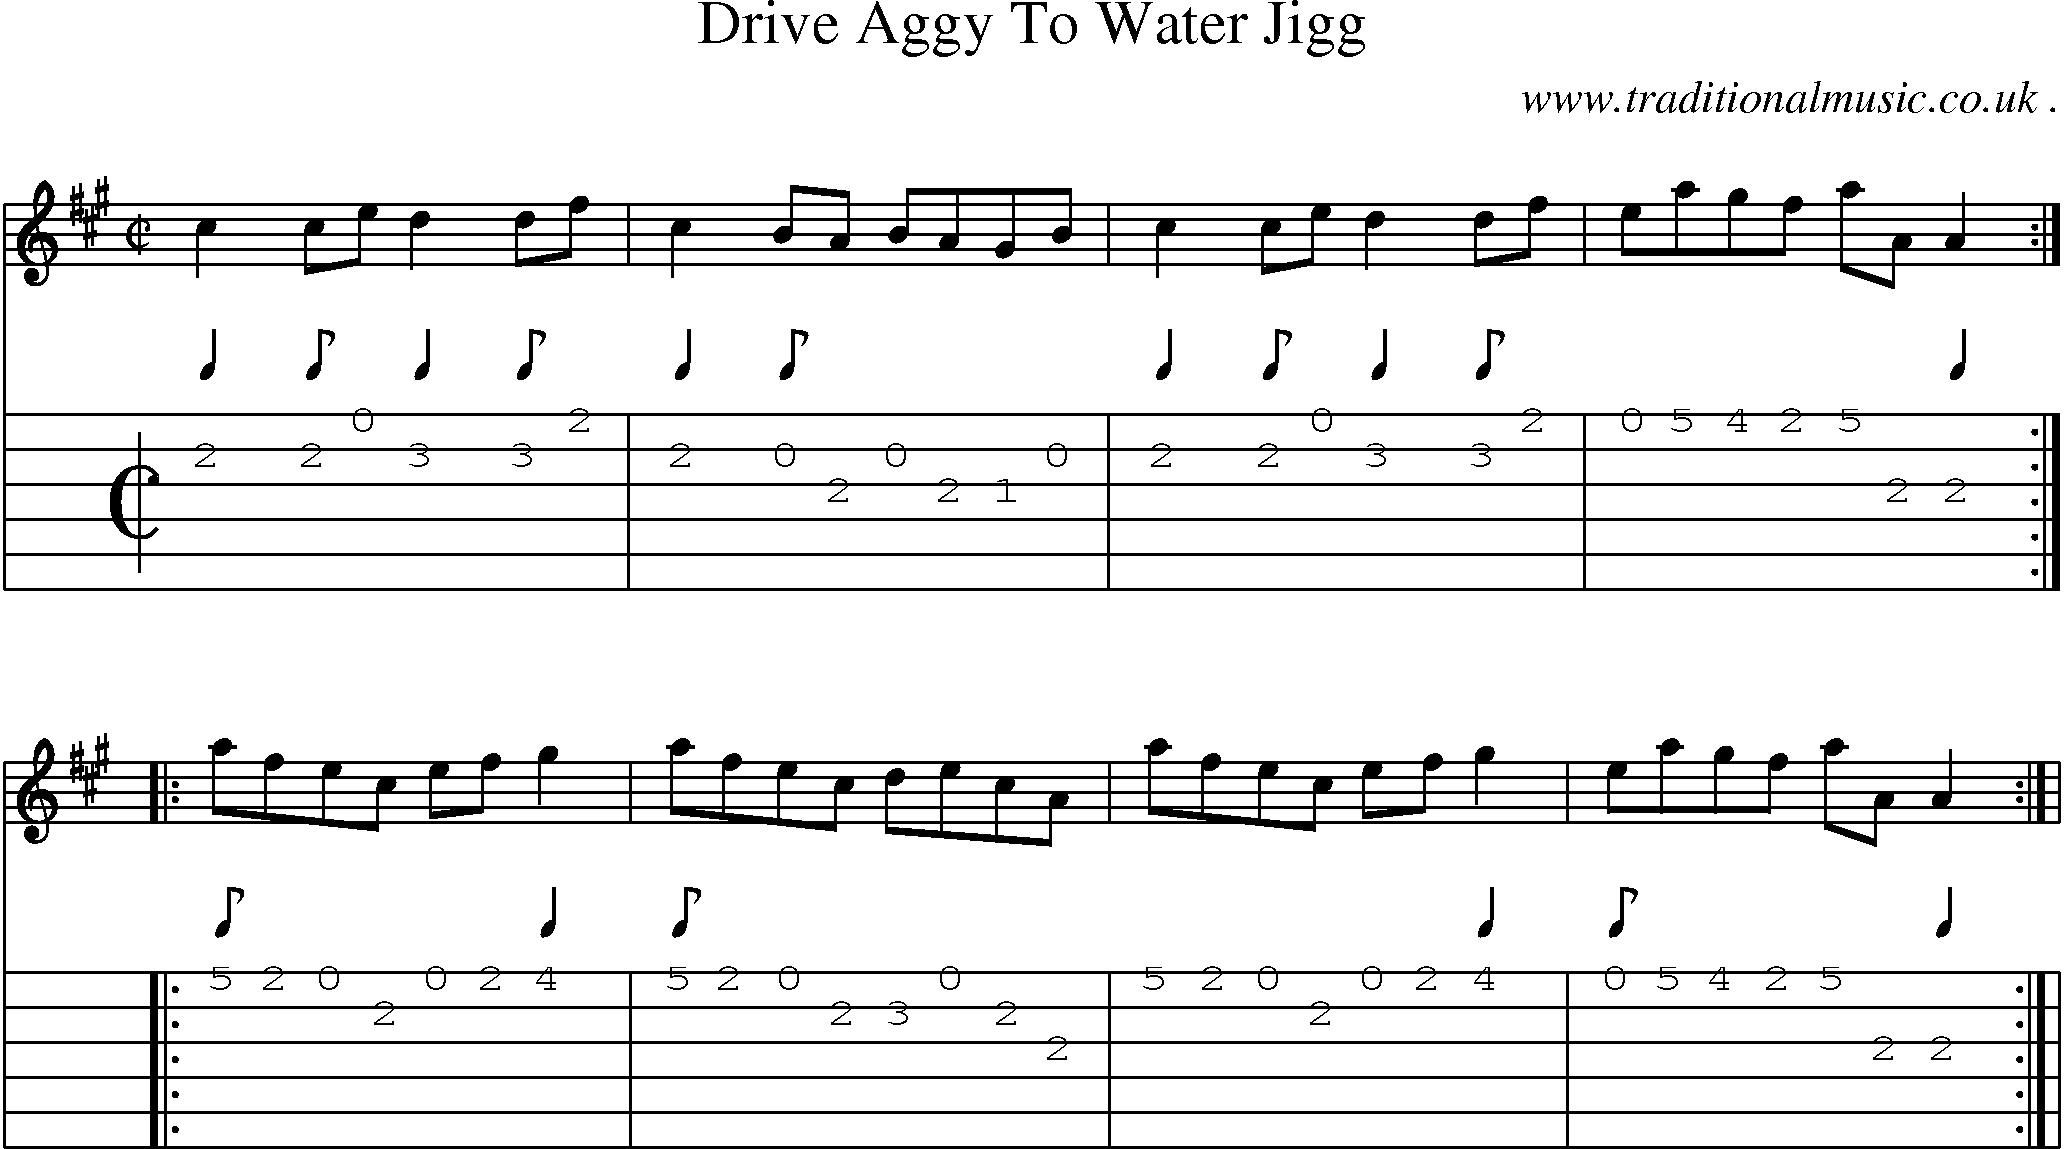 Sheet-Music and Guitar Tabs for Drive Aggy To Water Jigg